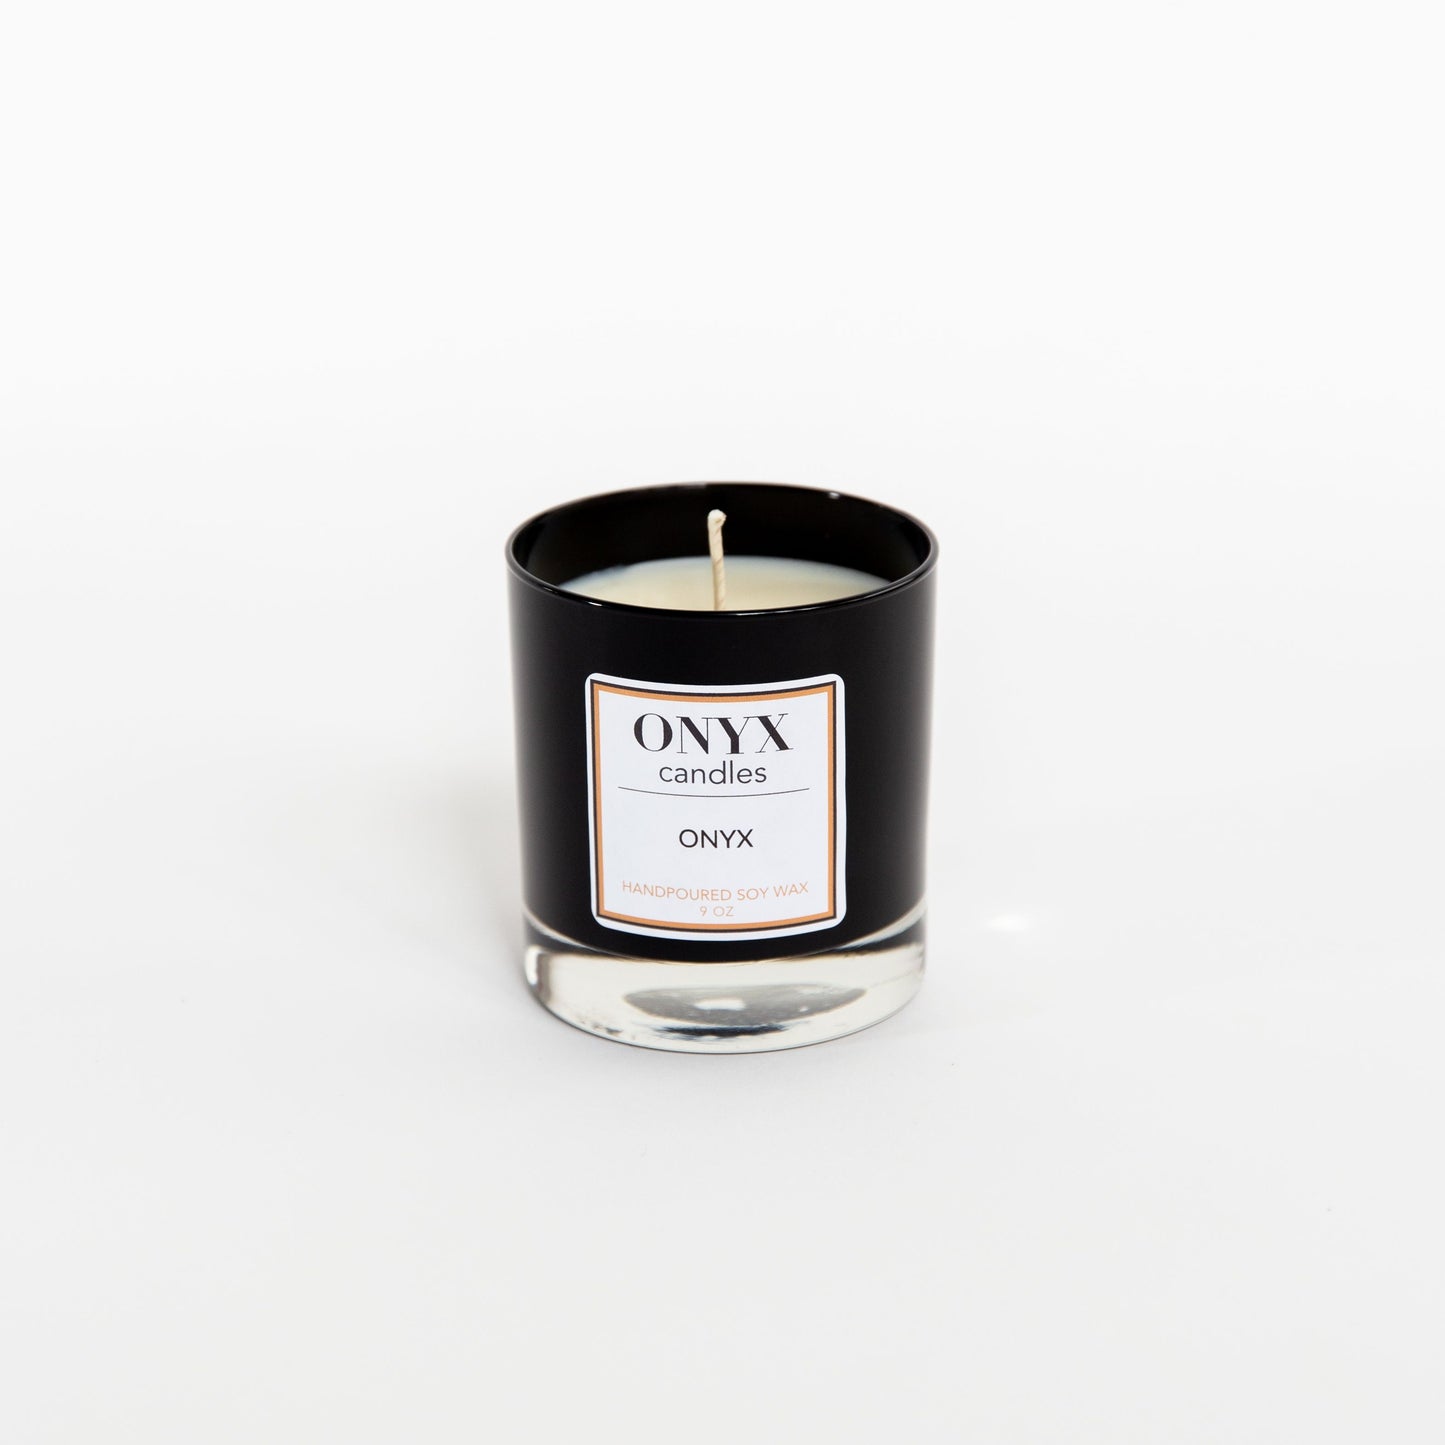 Onyx signature scent candle in a 9oz black glass jar